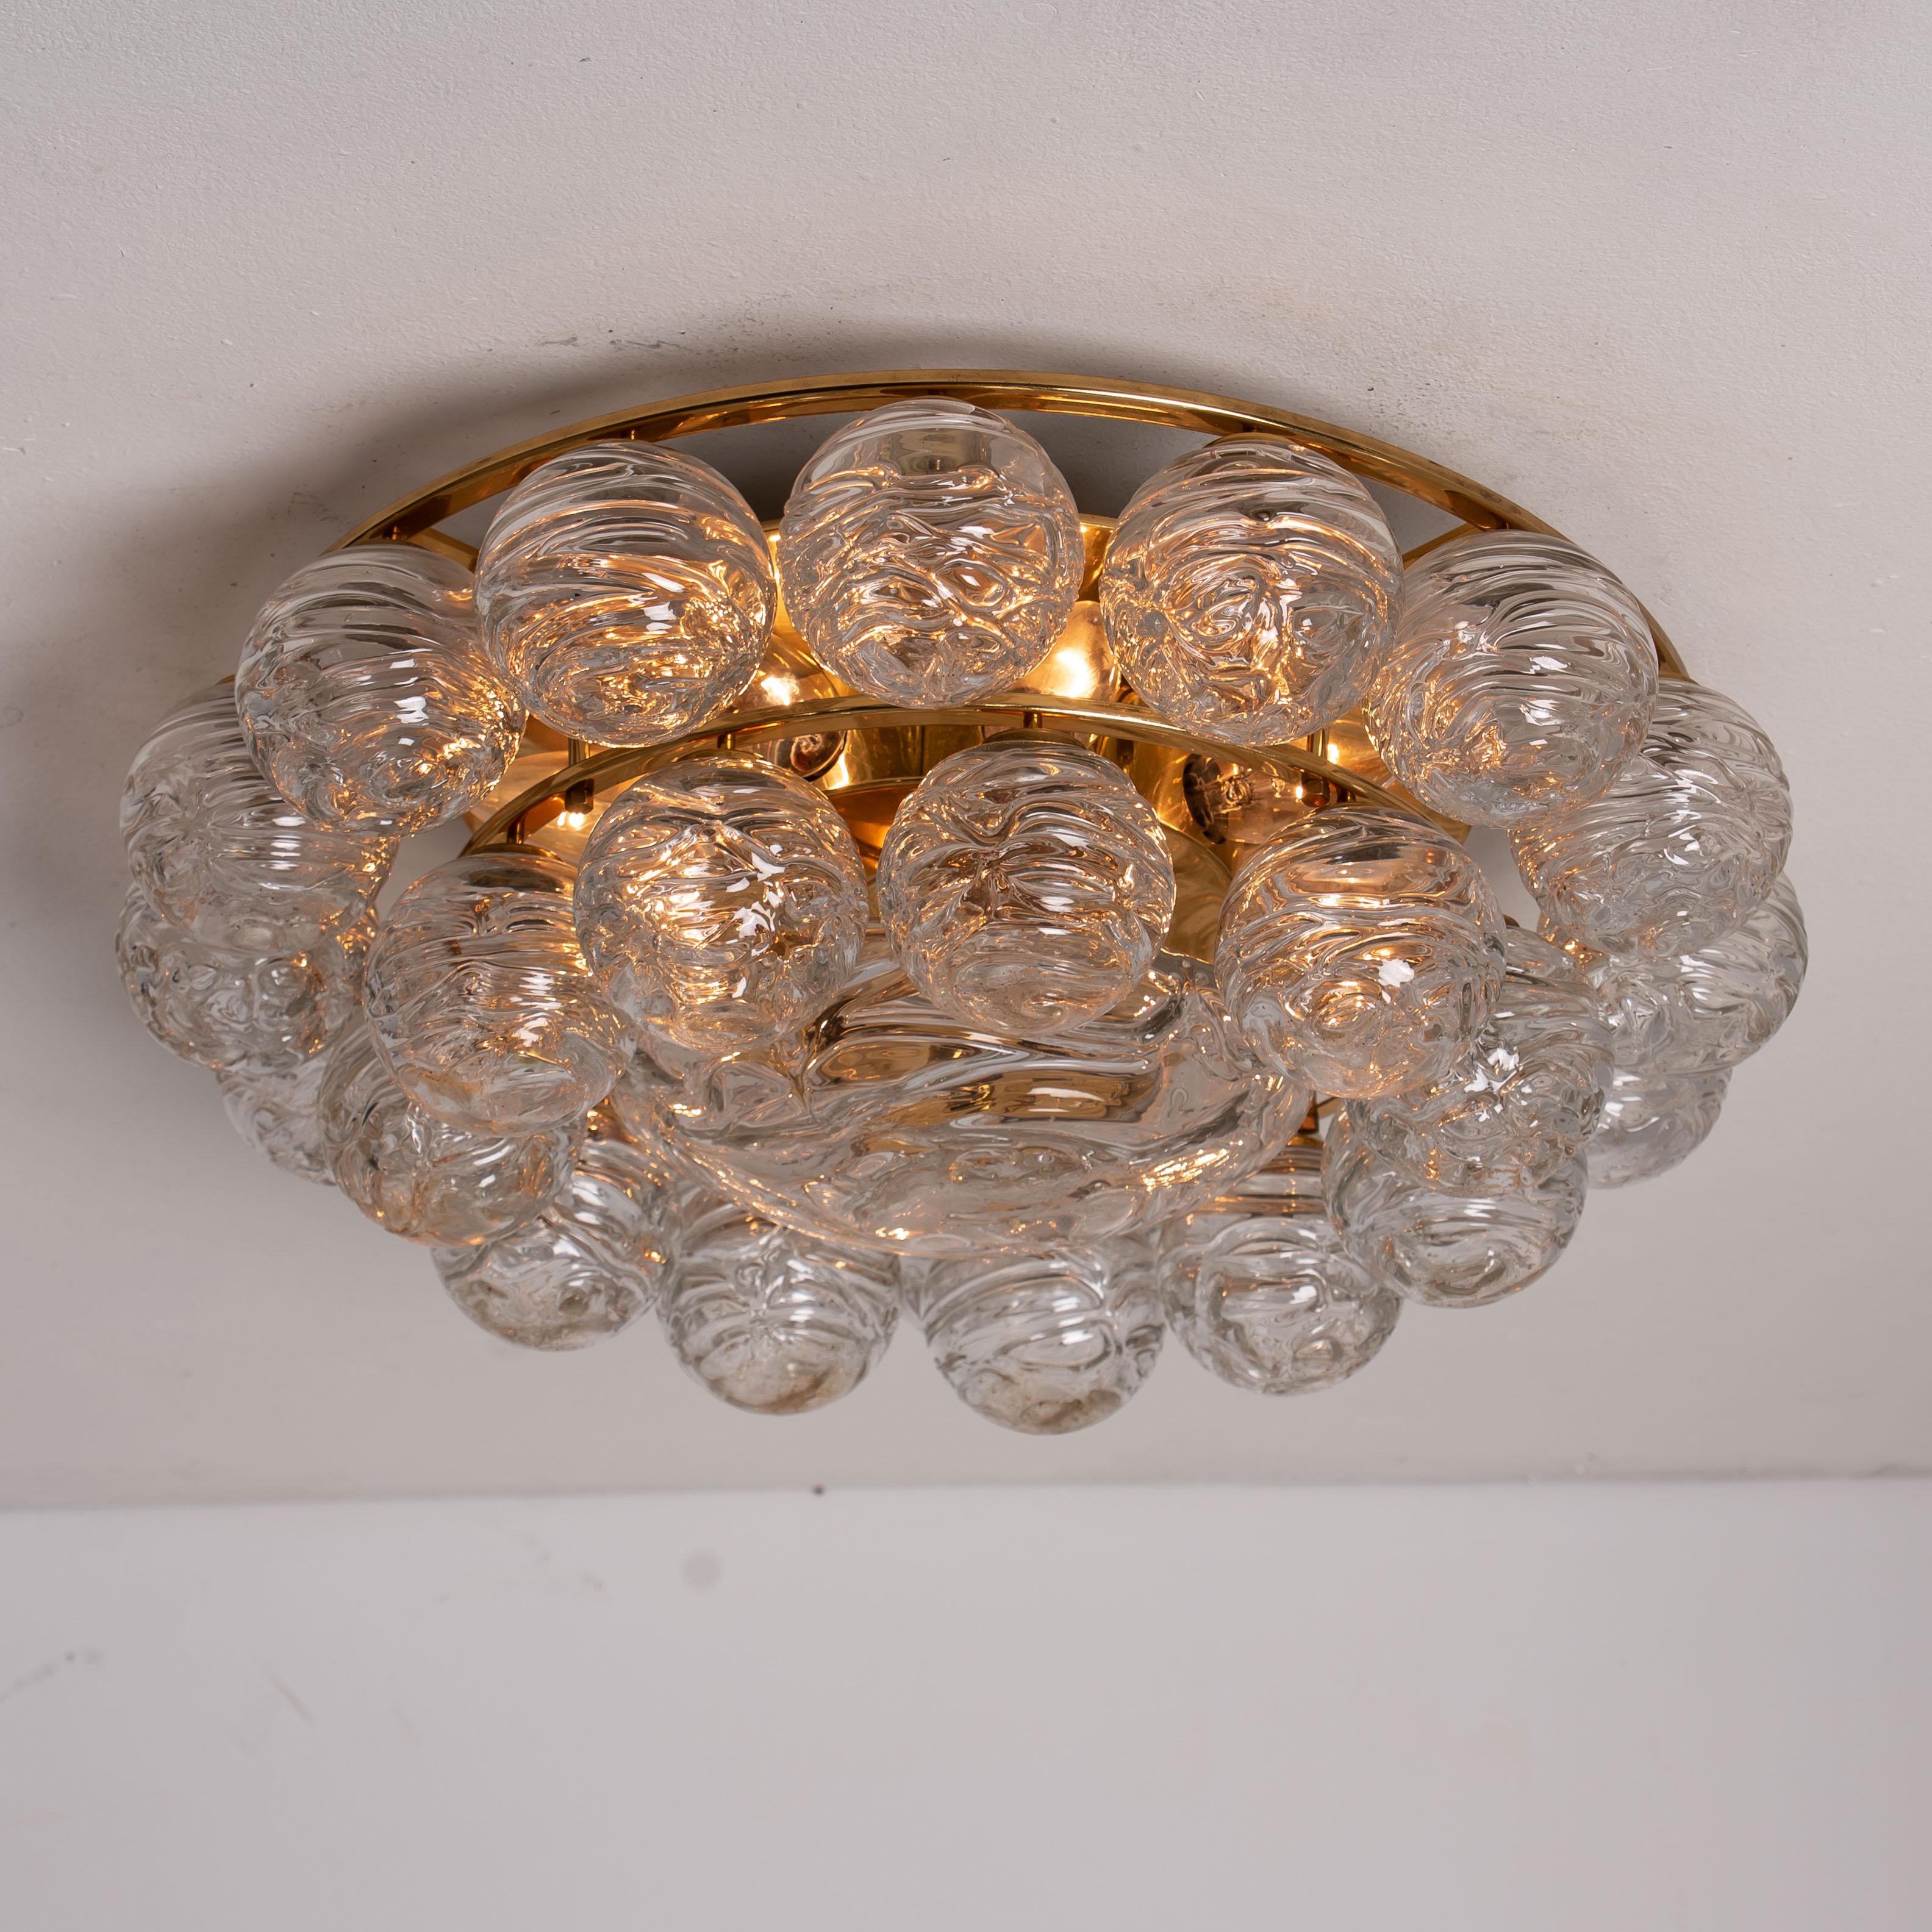 1 of the 2 Large Doria Flushmount Light Fixture Glass Brass Nickel, 1960s For Sale 10